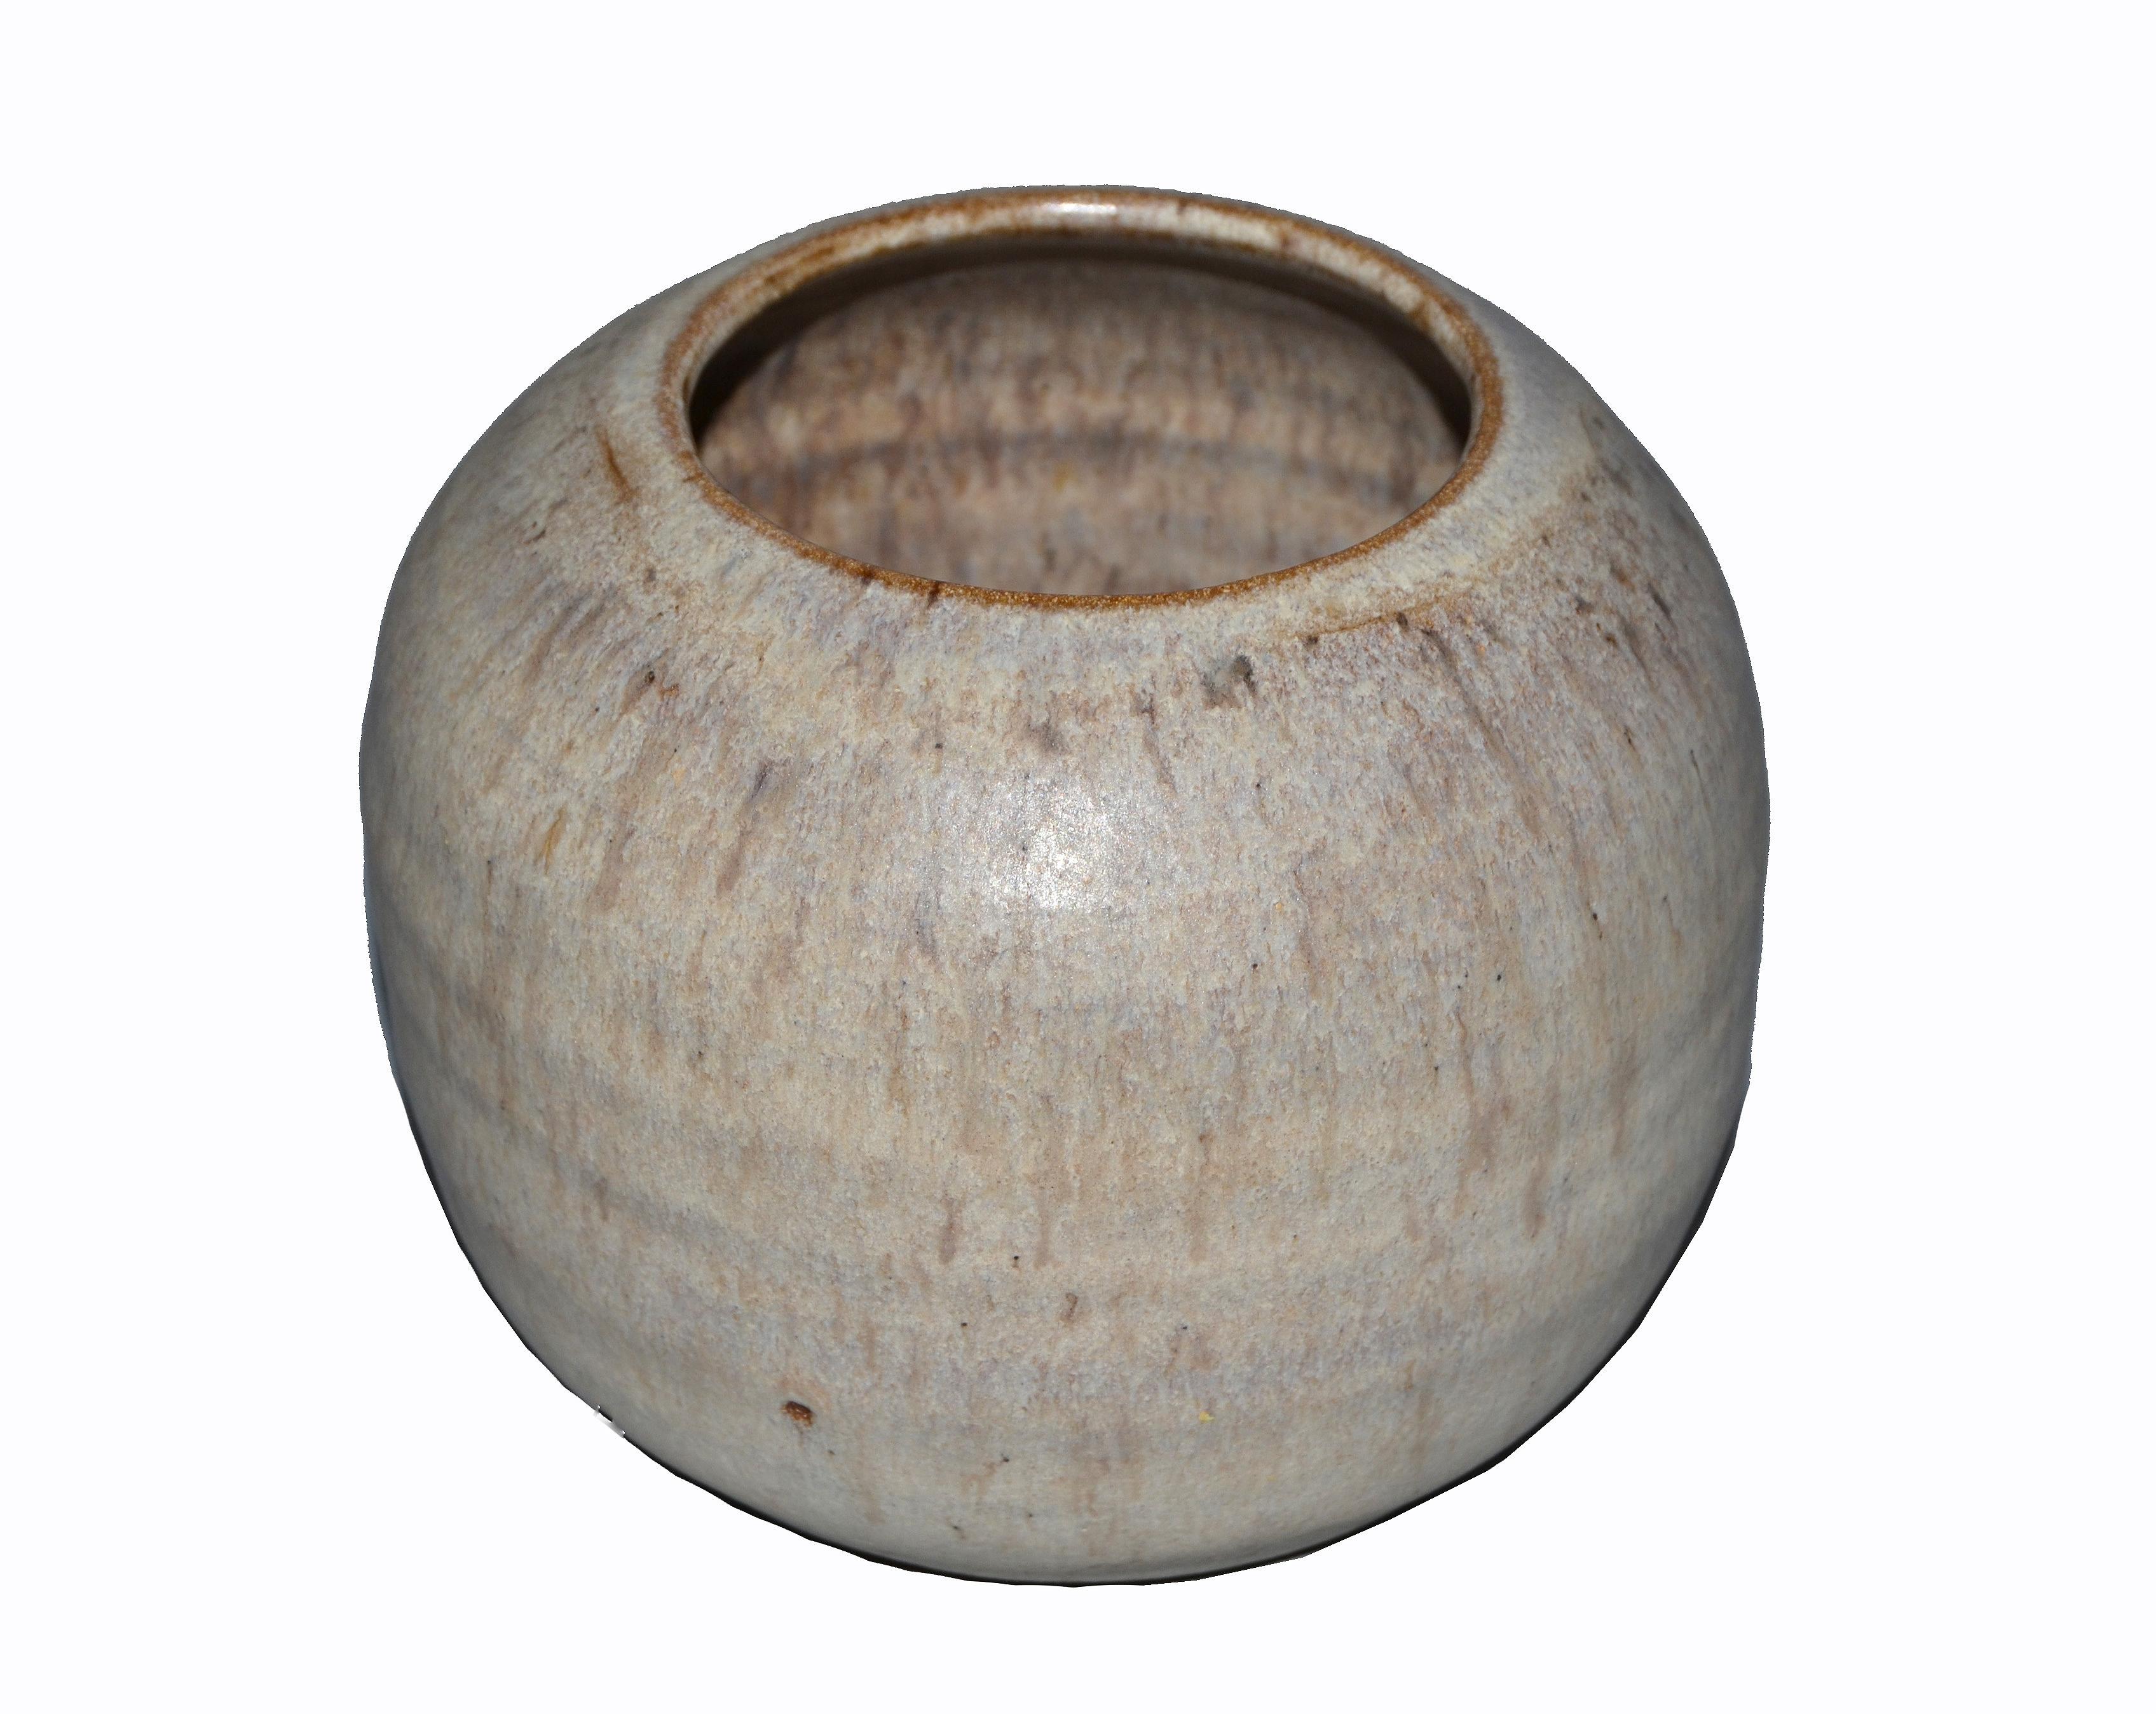 W. Young Mid-Century Modern handcrafted beige and brown pottery earthenware round vase, vessel or bowl.
Underneath engraved by the artist with W. Young.
Simple but lovely.